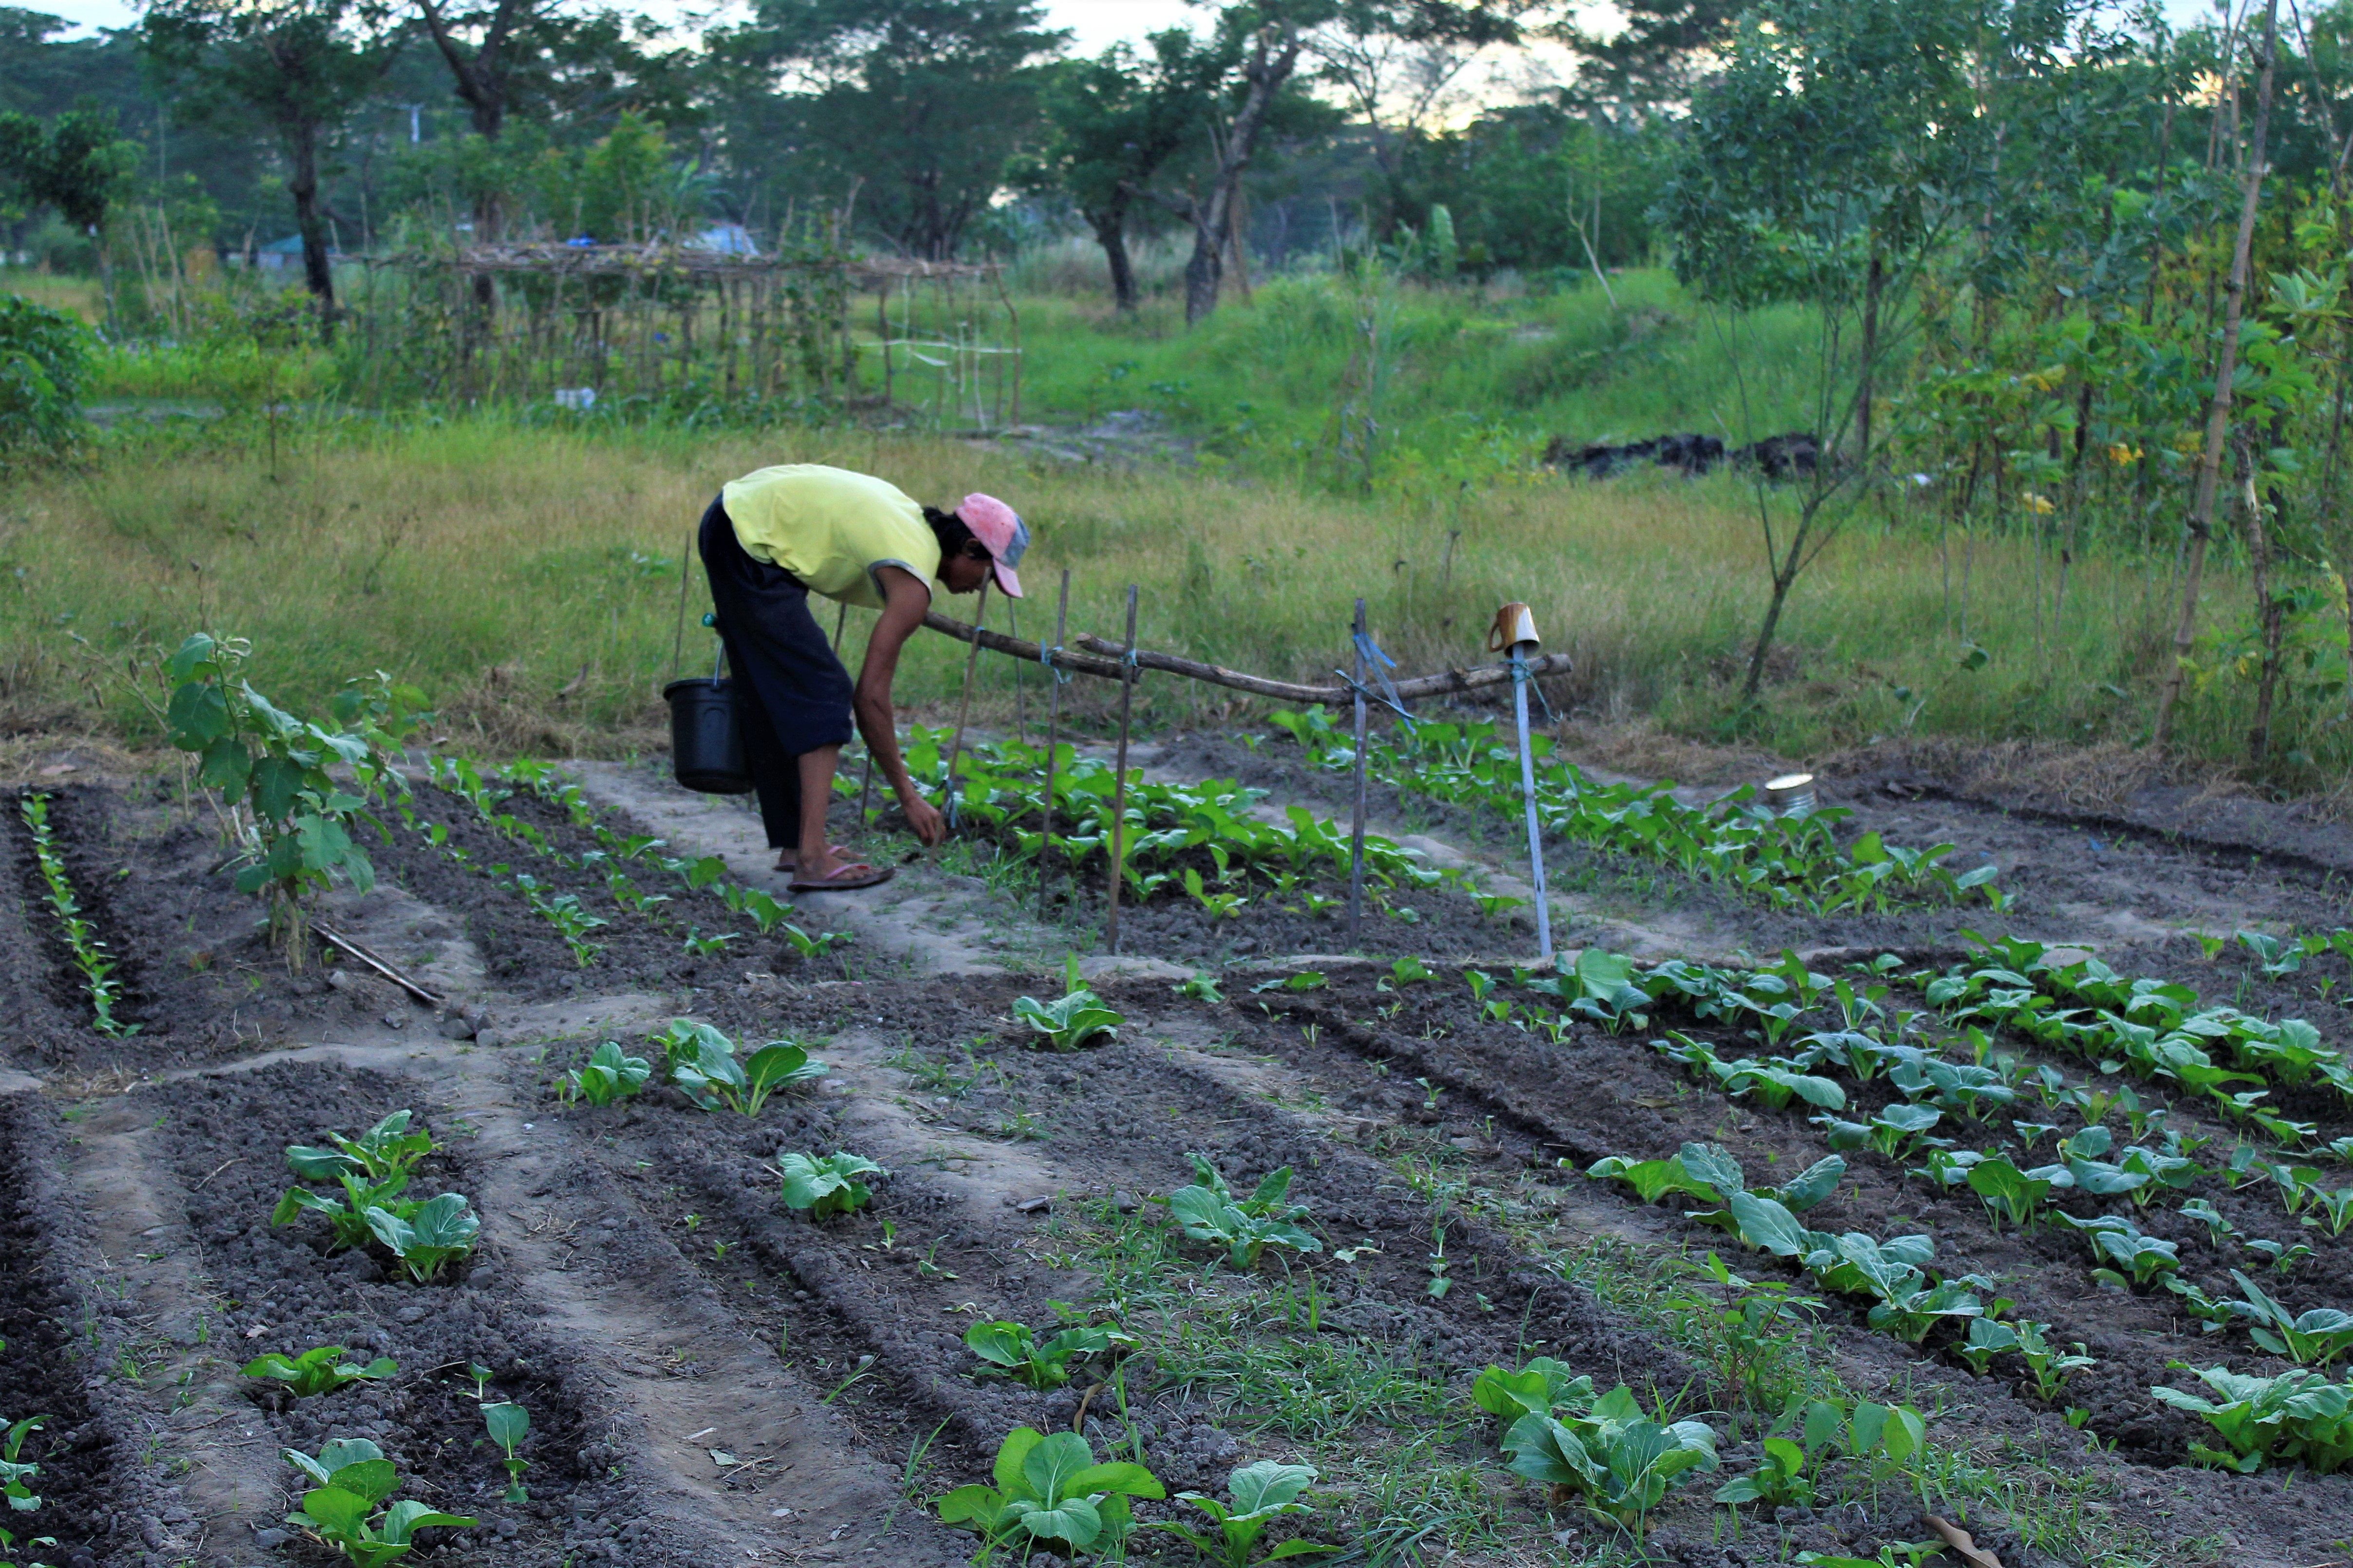 The vegetable garden beside the hut where Balete farmers welcome students and guests visiting the community. (Photo by Karen Ann Macalalad/Bulatlat)